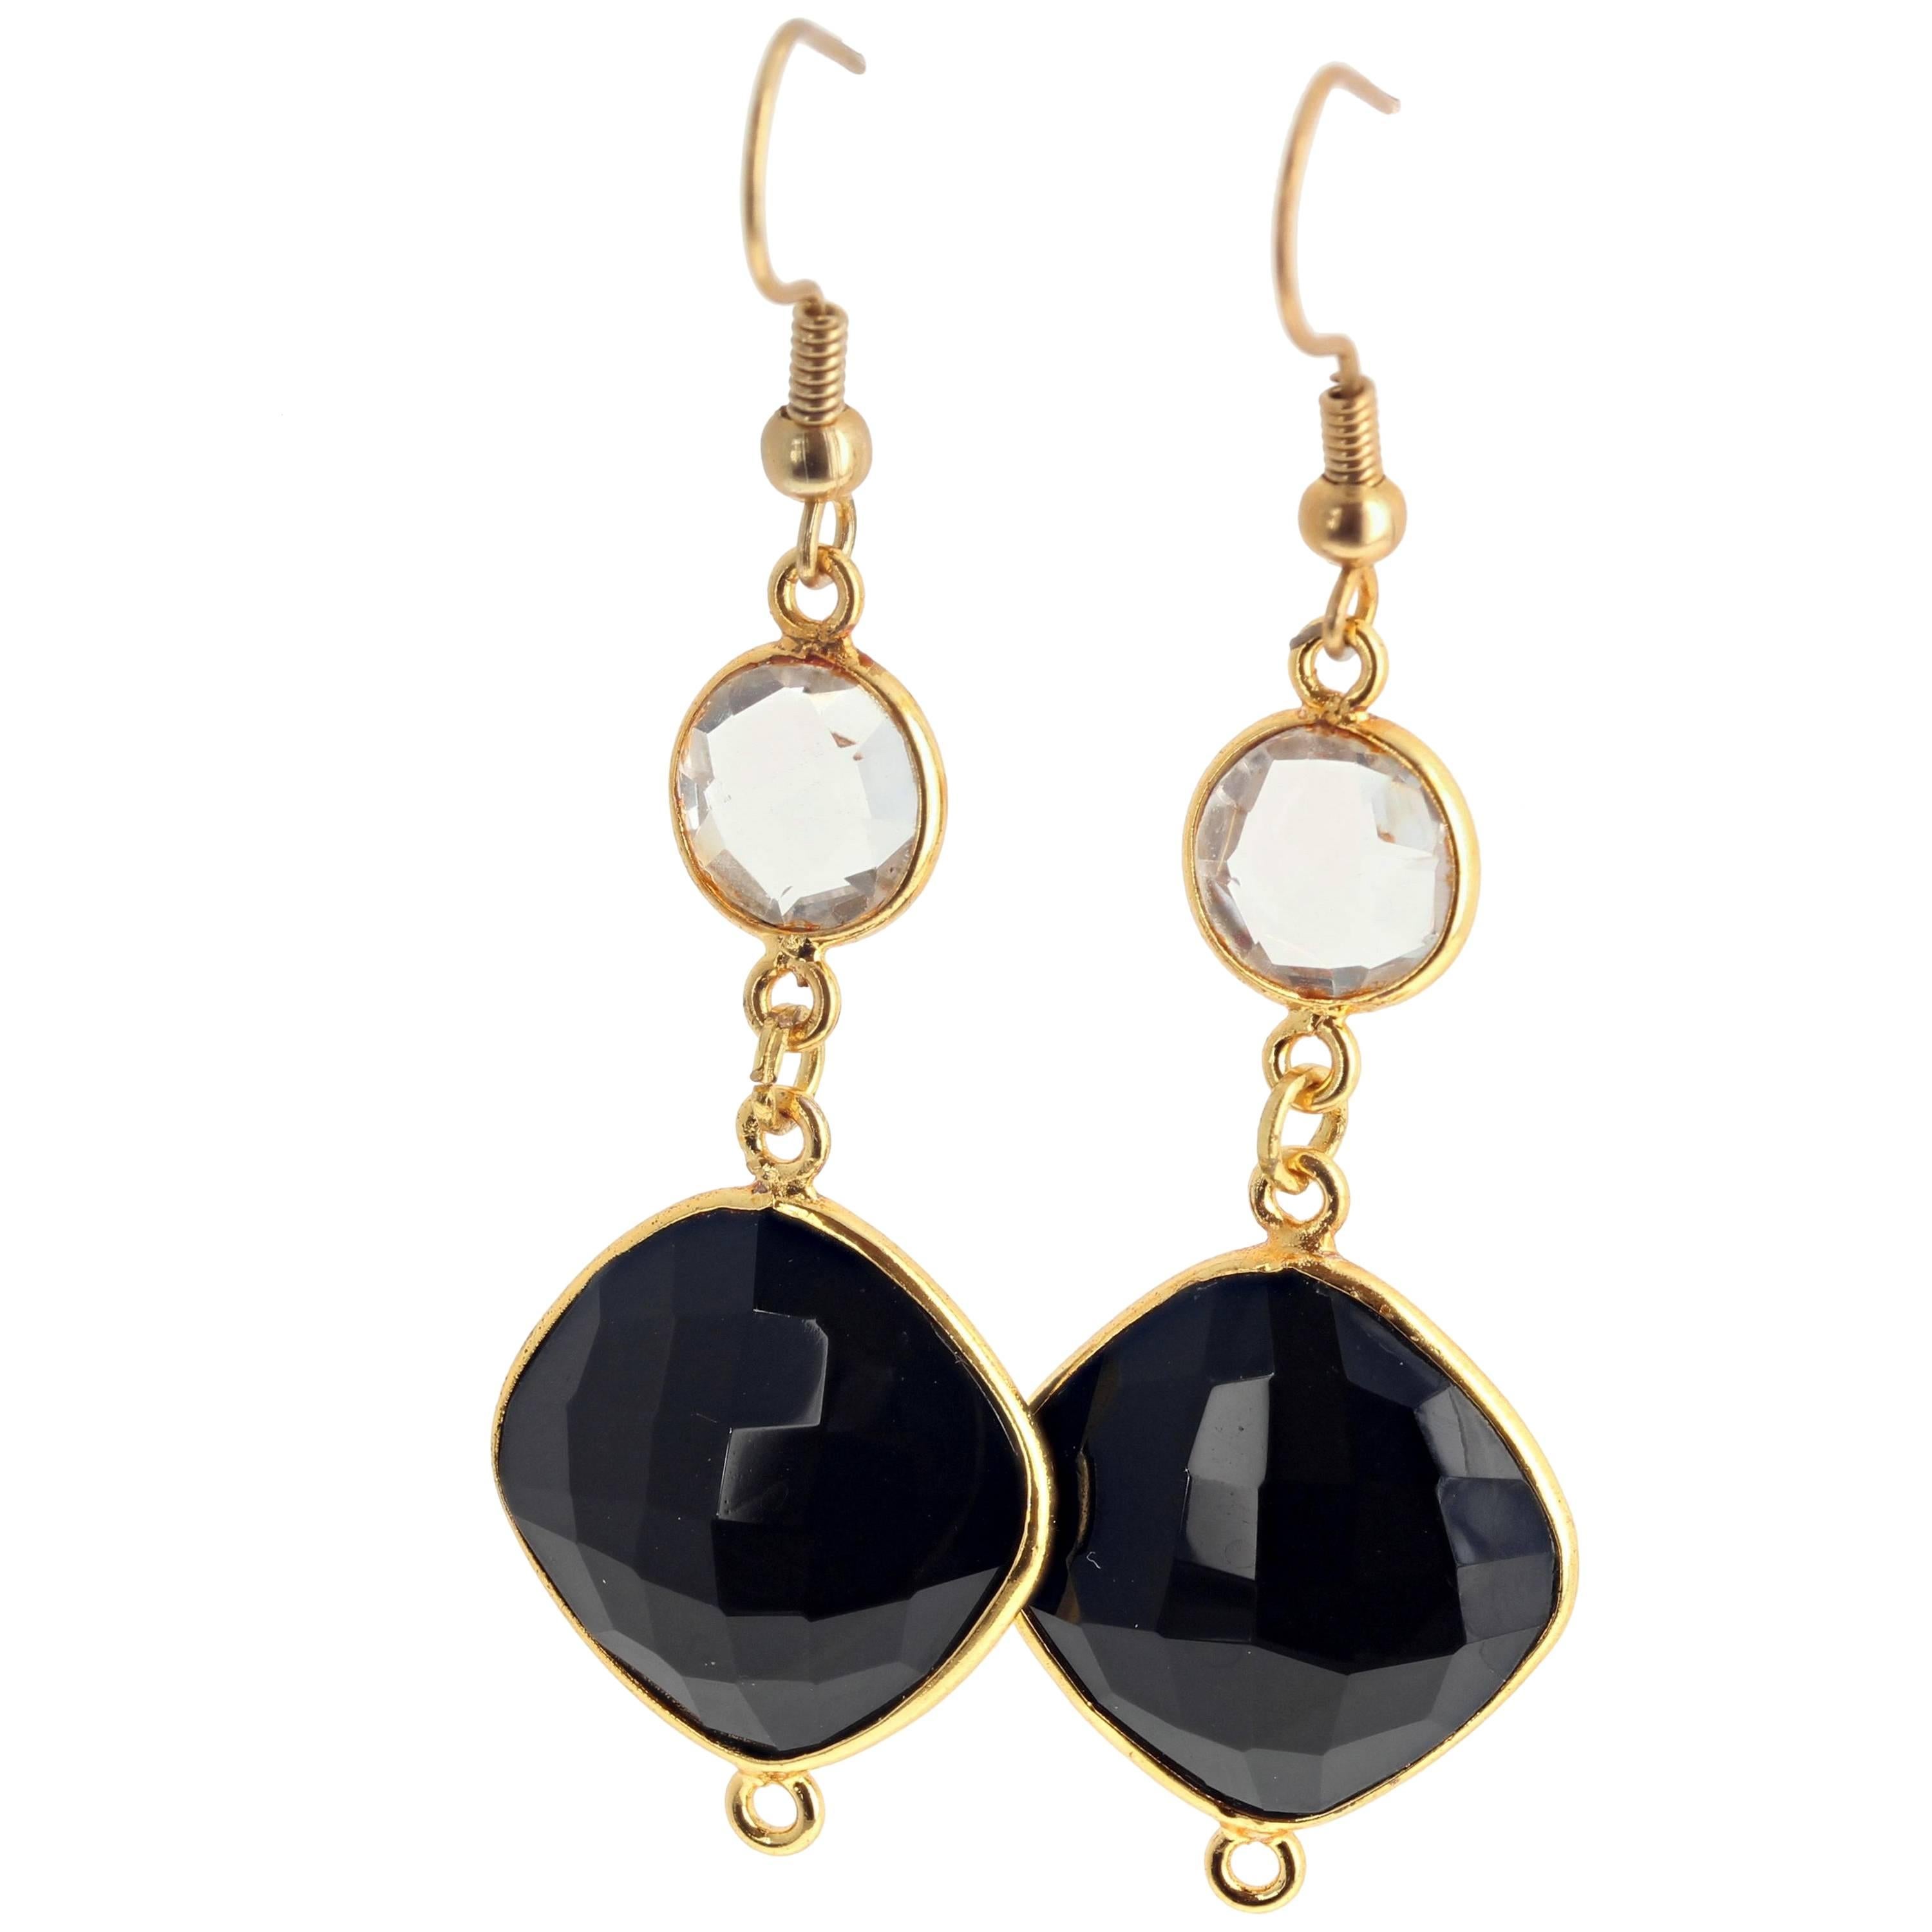 Unique Handmade Onyx and Quartz Gold Plated Hook Earrings